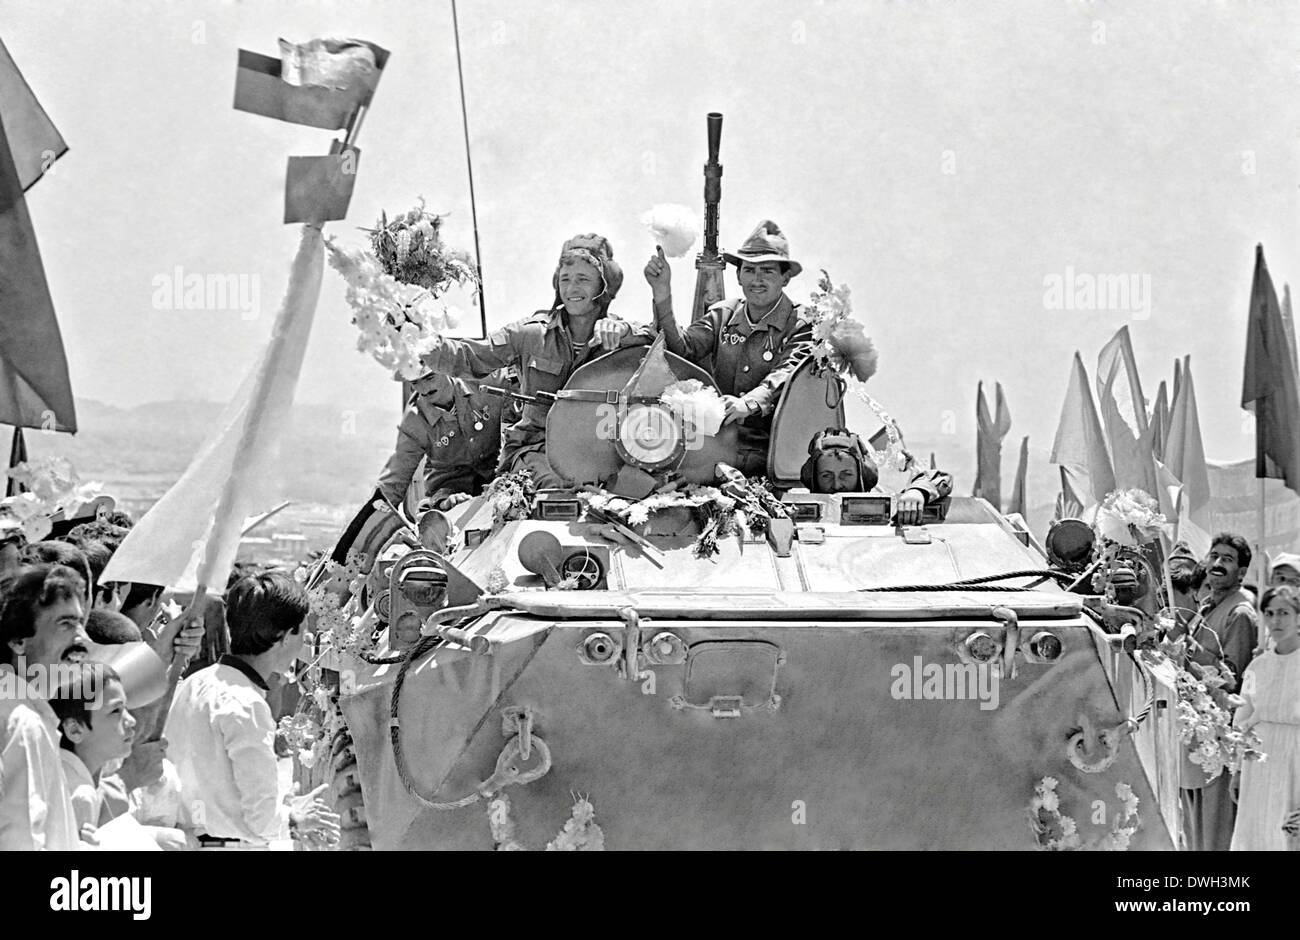 A convoy of Soviet soldiers arrive to cheering crowds after their arrival in Kabul from the eastern city of Jalalabad as the beginning of the Soviet withdrawal May 15, 1988 in Kabul Afghanistan. Stock Photo